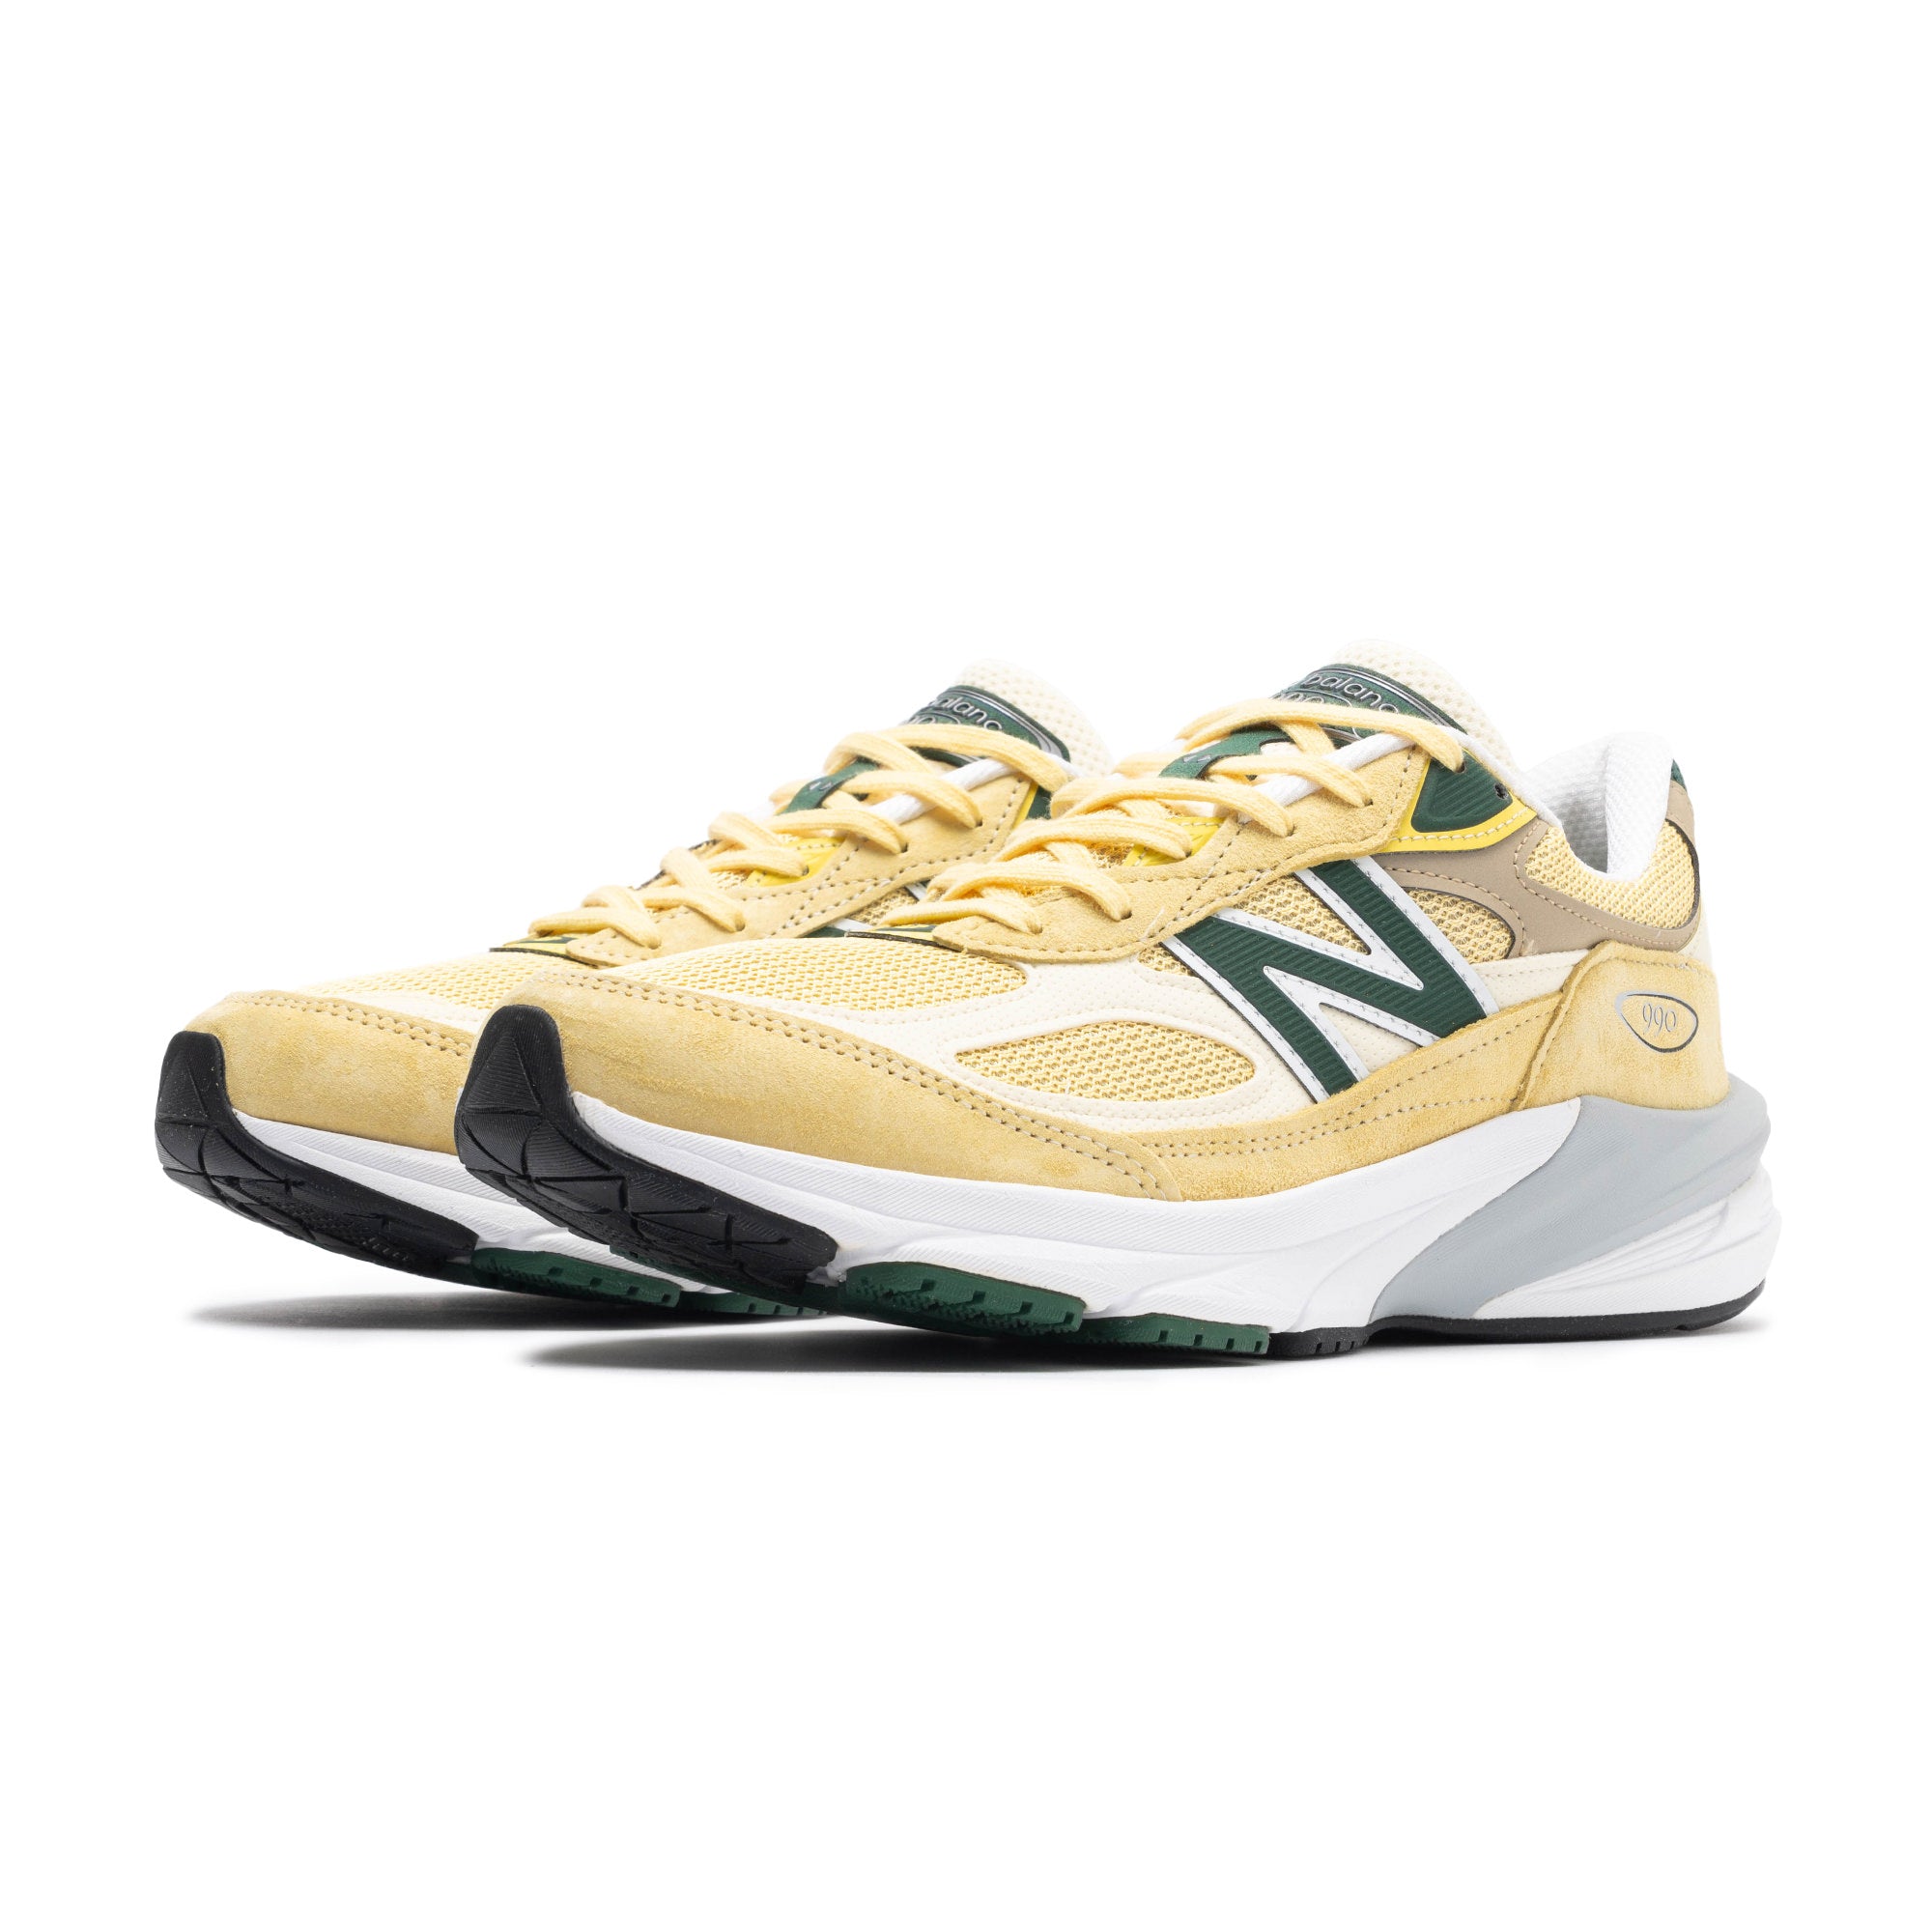 New Balance CT20 'White Camo' White Black Green Sneakers Shoes CT20CP1